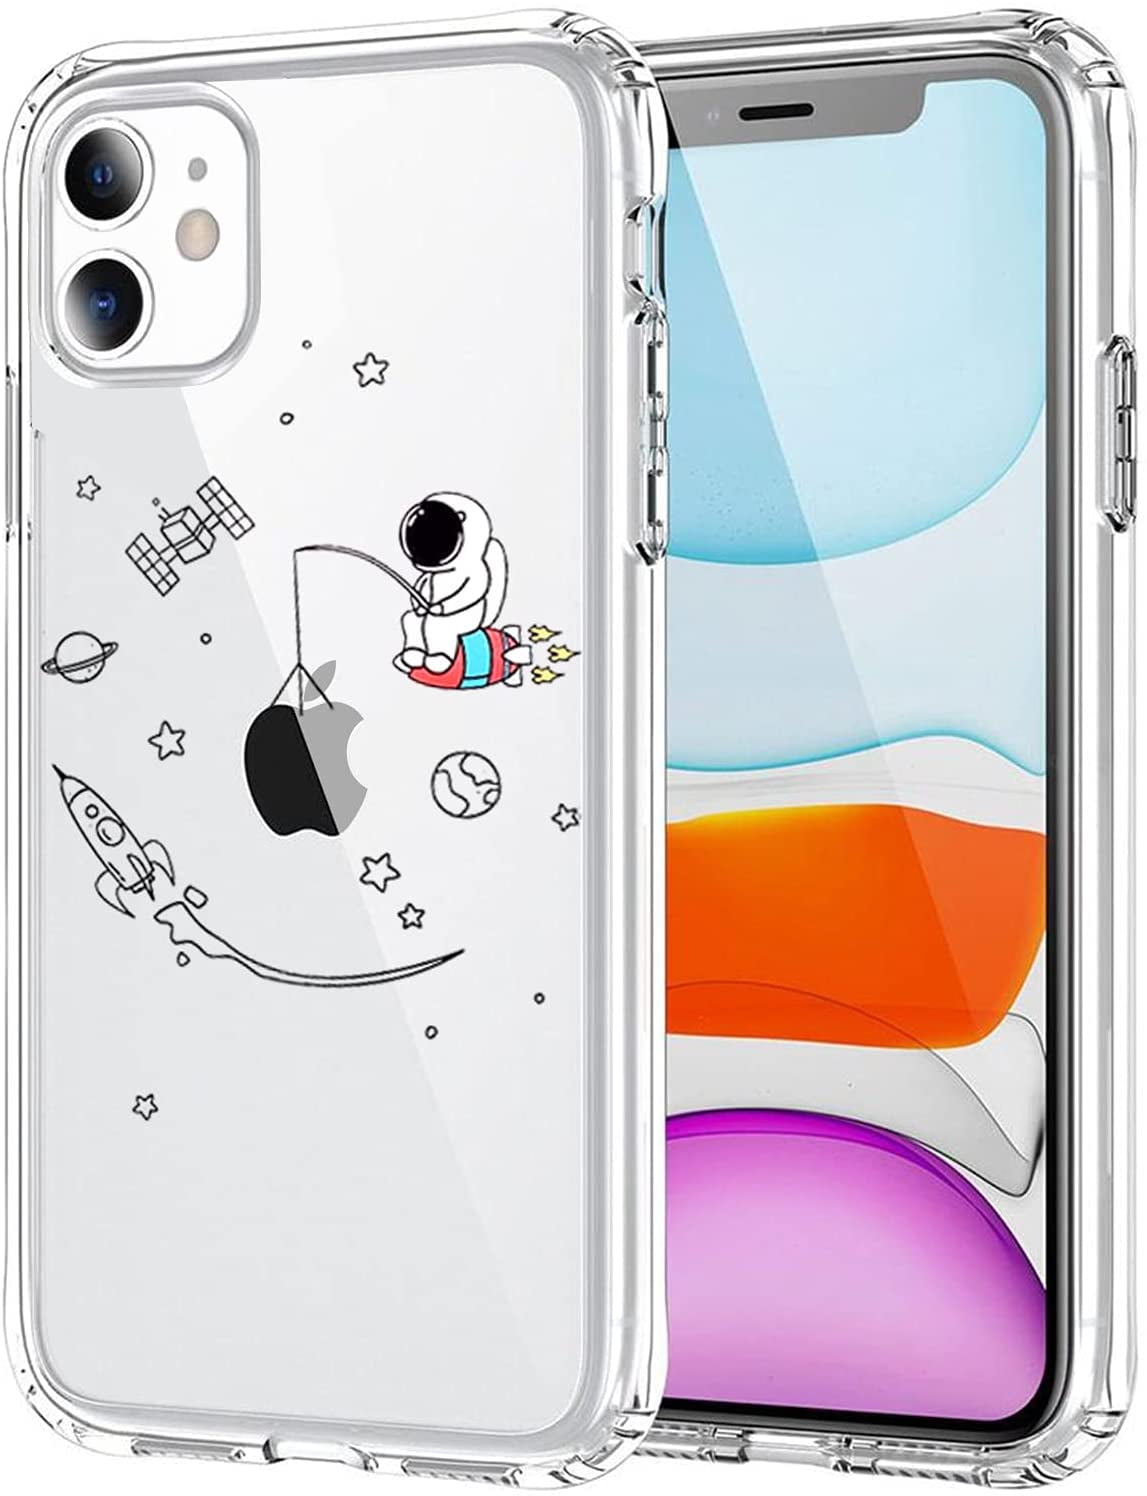 Compatible With Iphone Case Clear Cute With Astronaut Outer Space Planet Star Creative Pattern Soft Tpu Shockproof Slim For Iphone Walmart Com